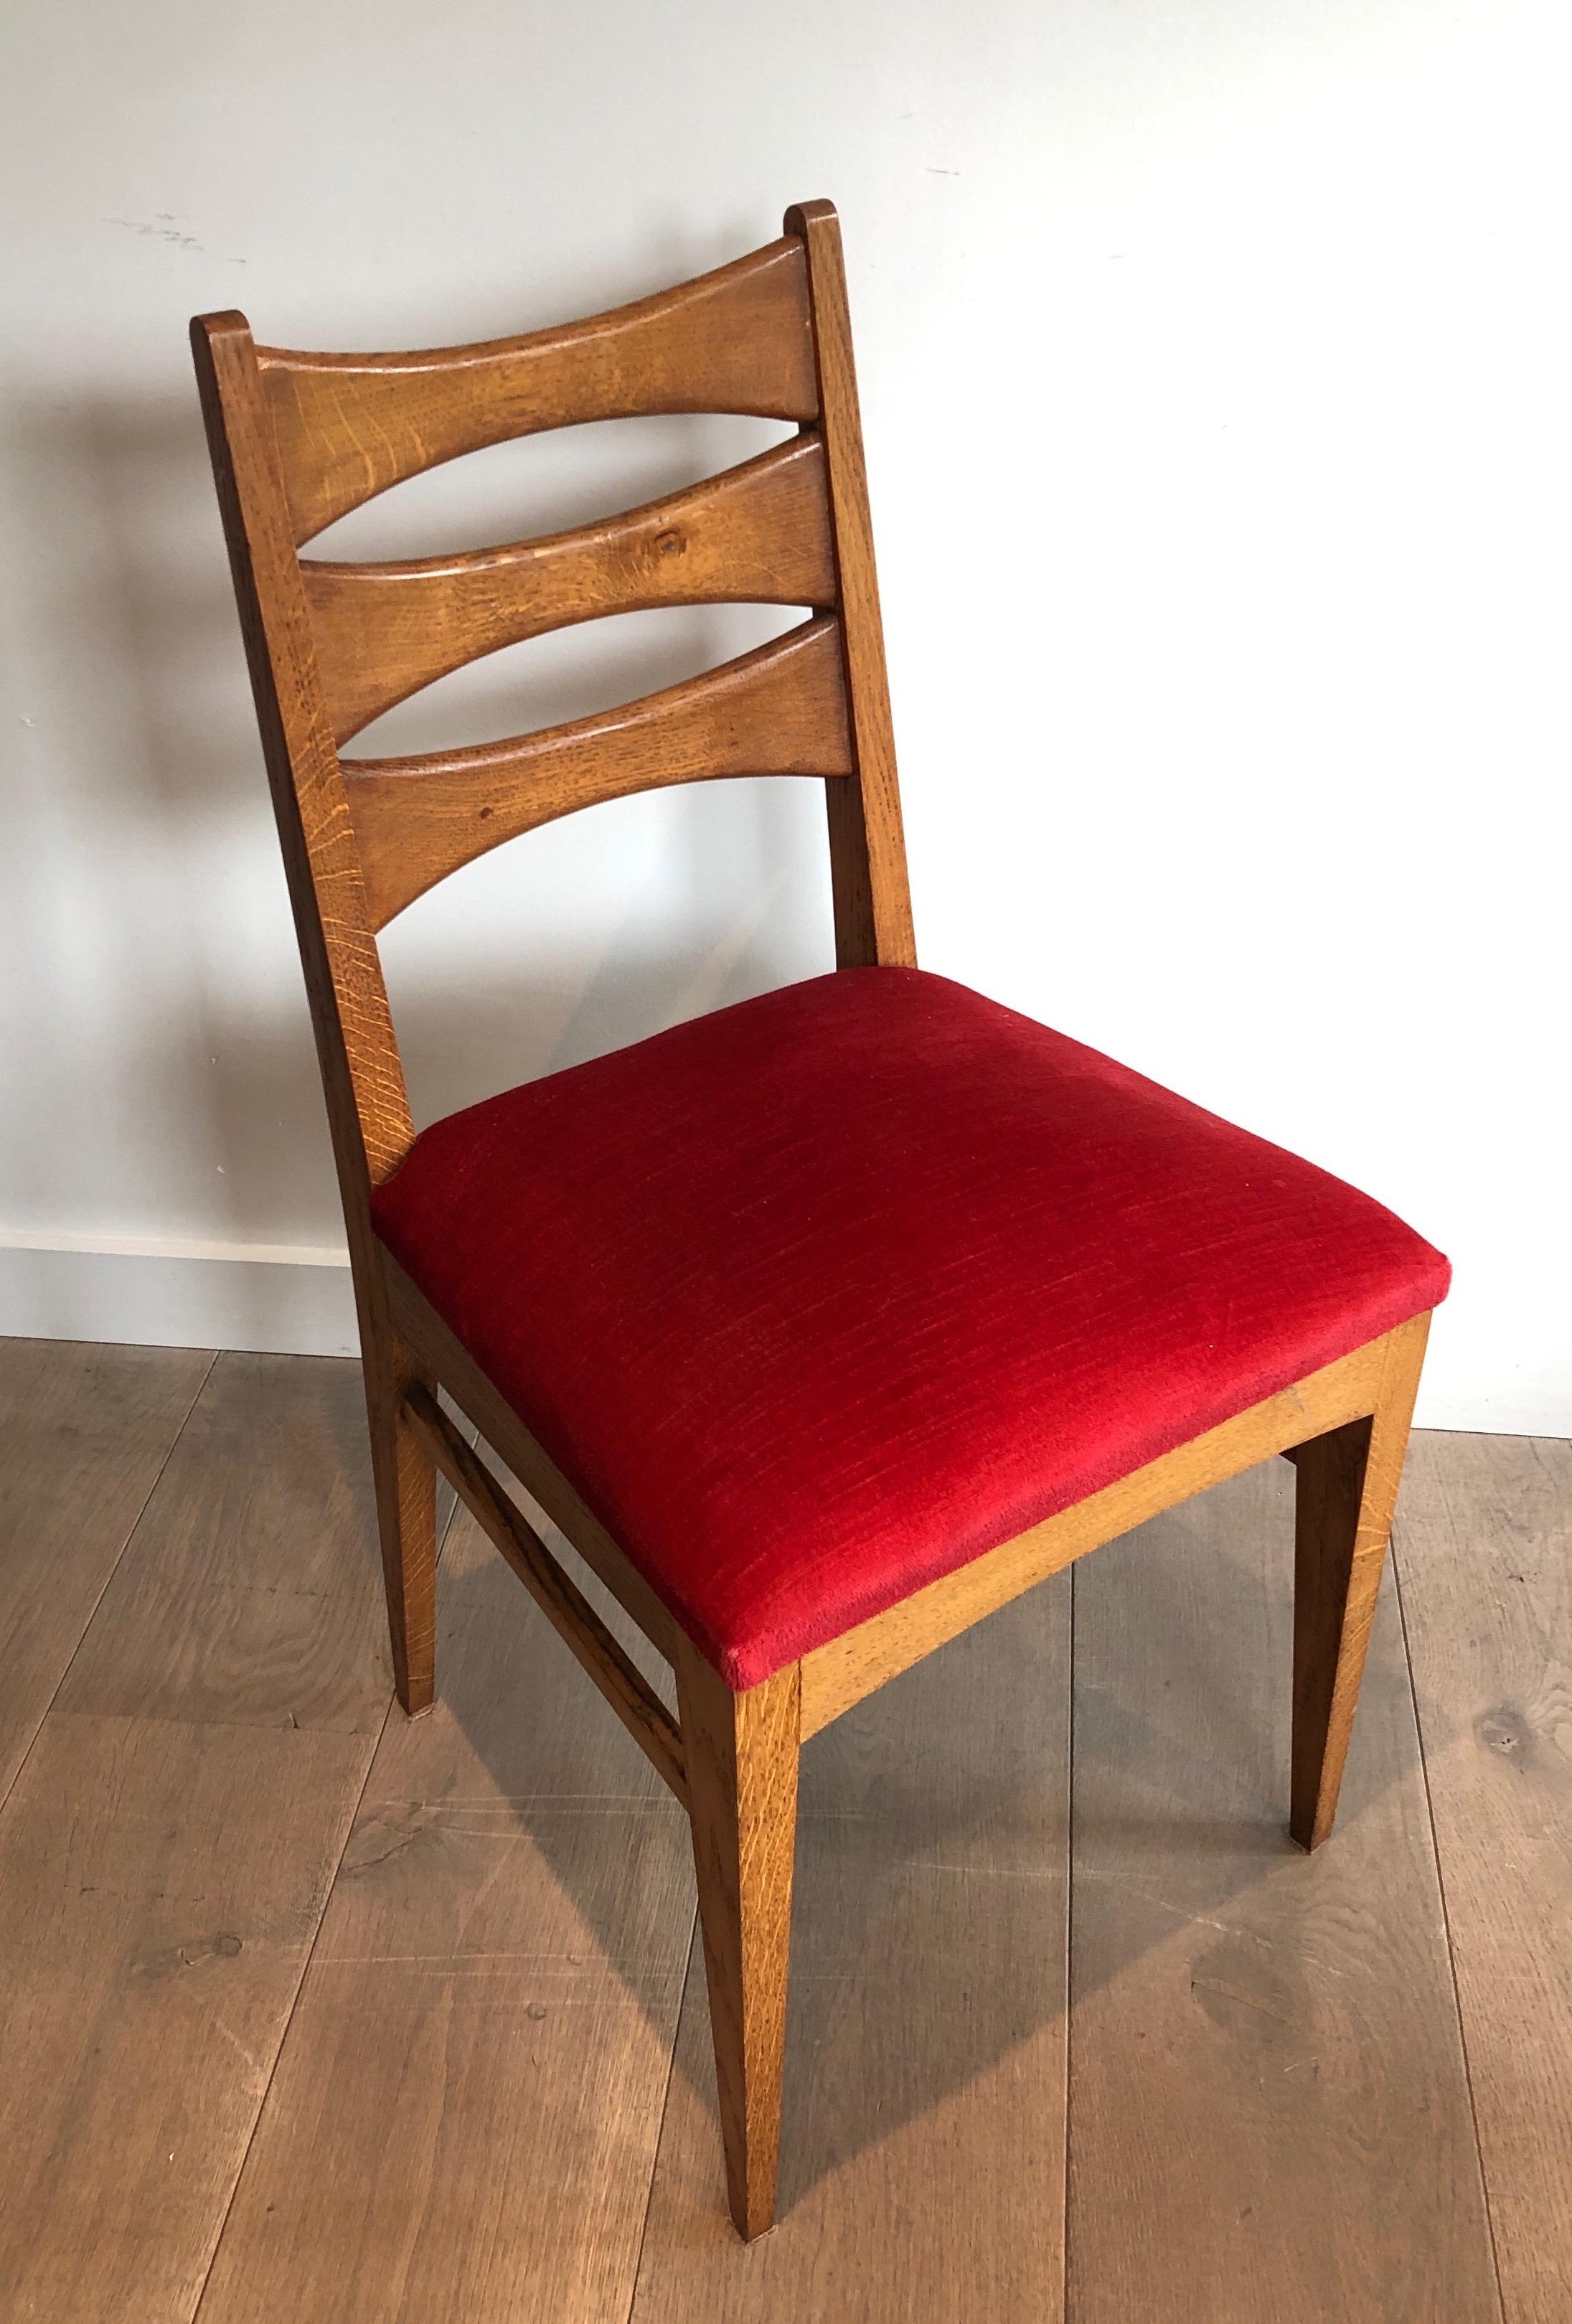 Set of 6 Oak and Red Velvet Chairs. French Work, Circa 1950 For Sale 7